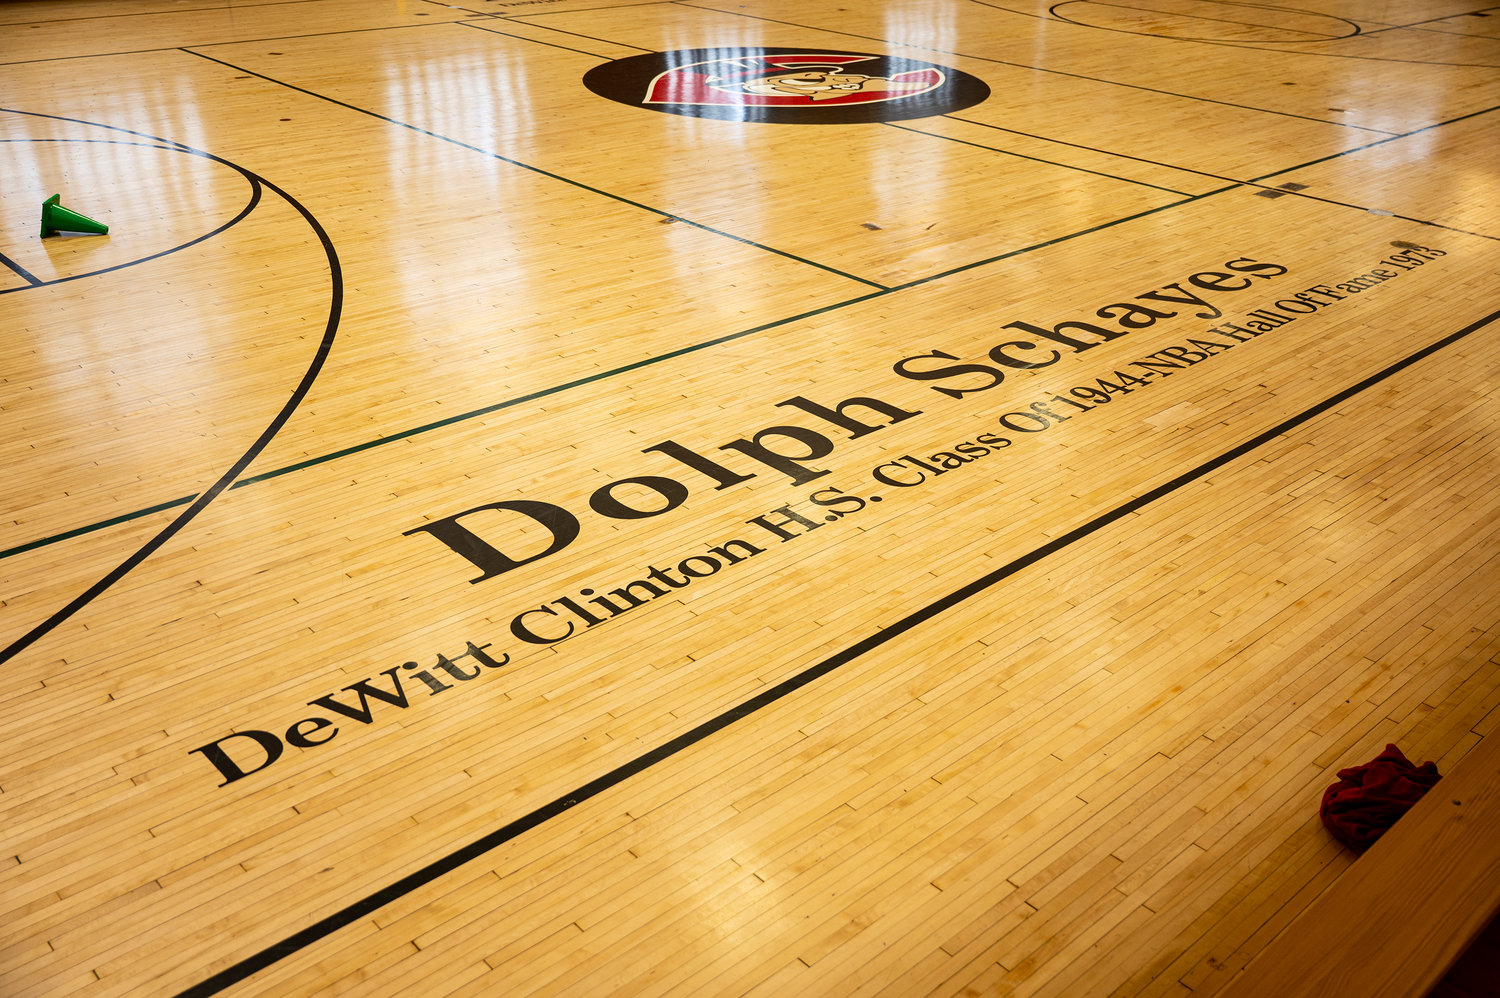 Nate (Tiny) Archibald, is one of two people to have his name painted on the floor of DeWitt Clinton High School’s gym. When Clinton principal Pierre Orbe the Hall of Fame NBA star to allow his name to be included in the gym, Archibald said only if his name was added next to the late Dolph Schayes, who played for the team that would eventually become the Philadelphia 76ers.